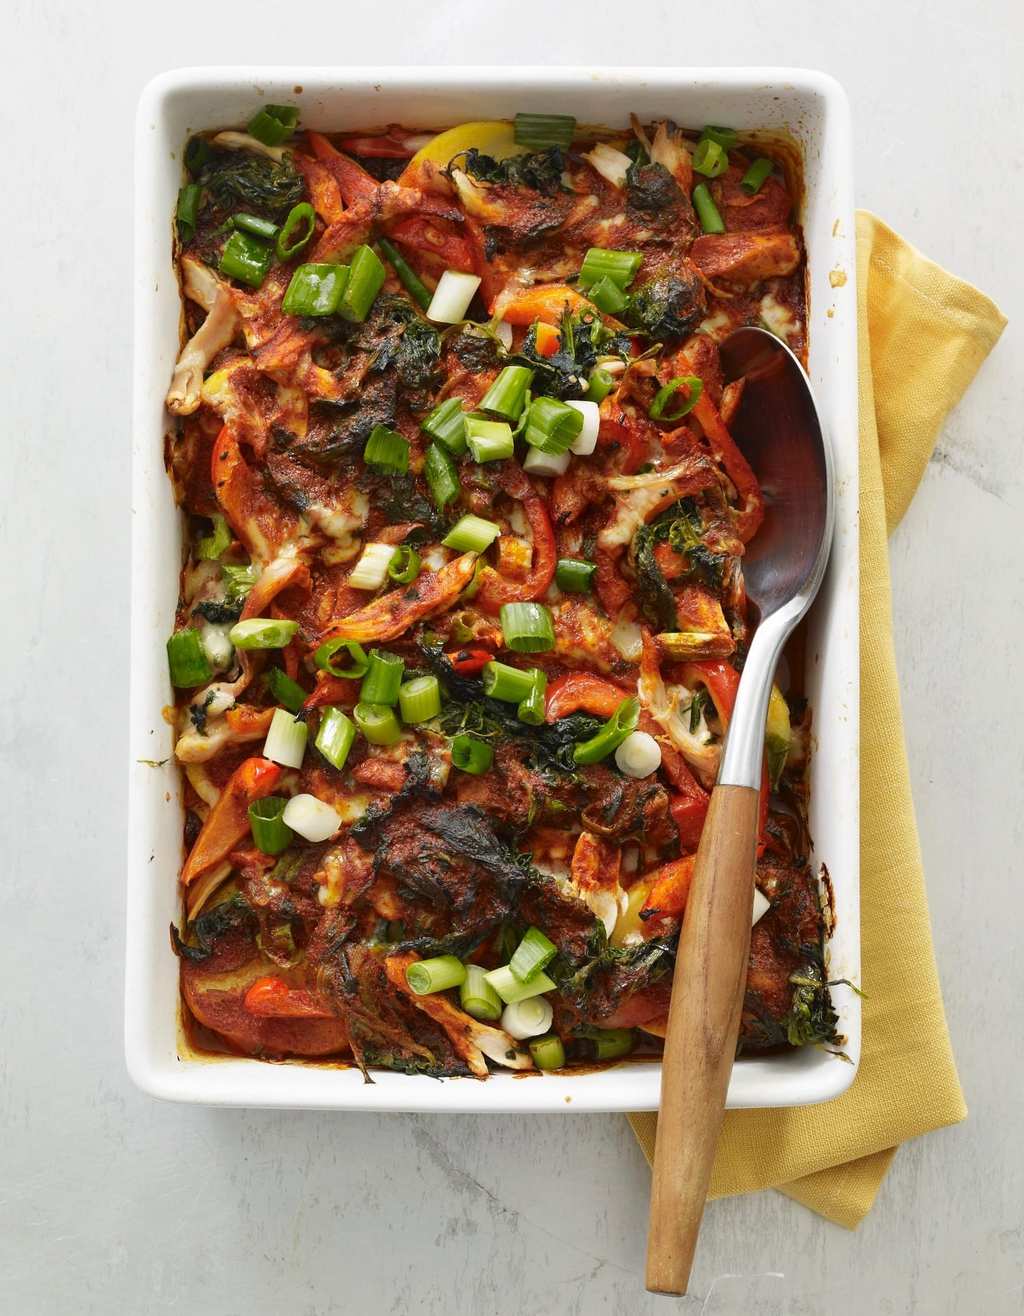 Spinach and Chicken Enchilada Casserole baked